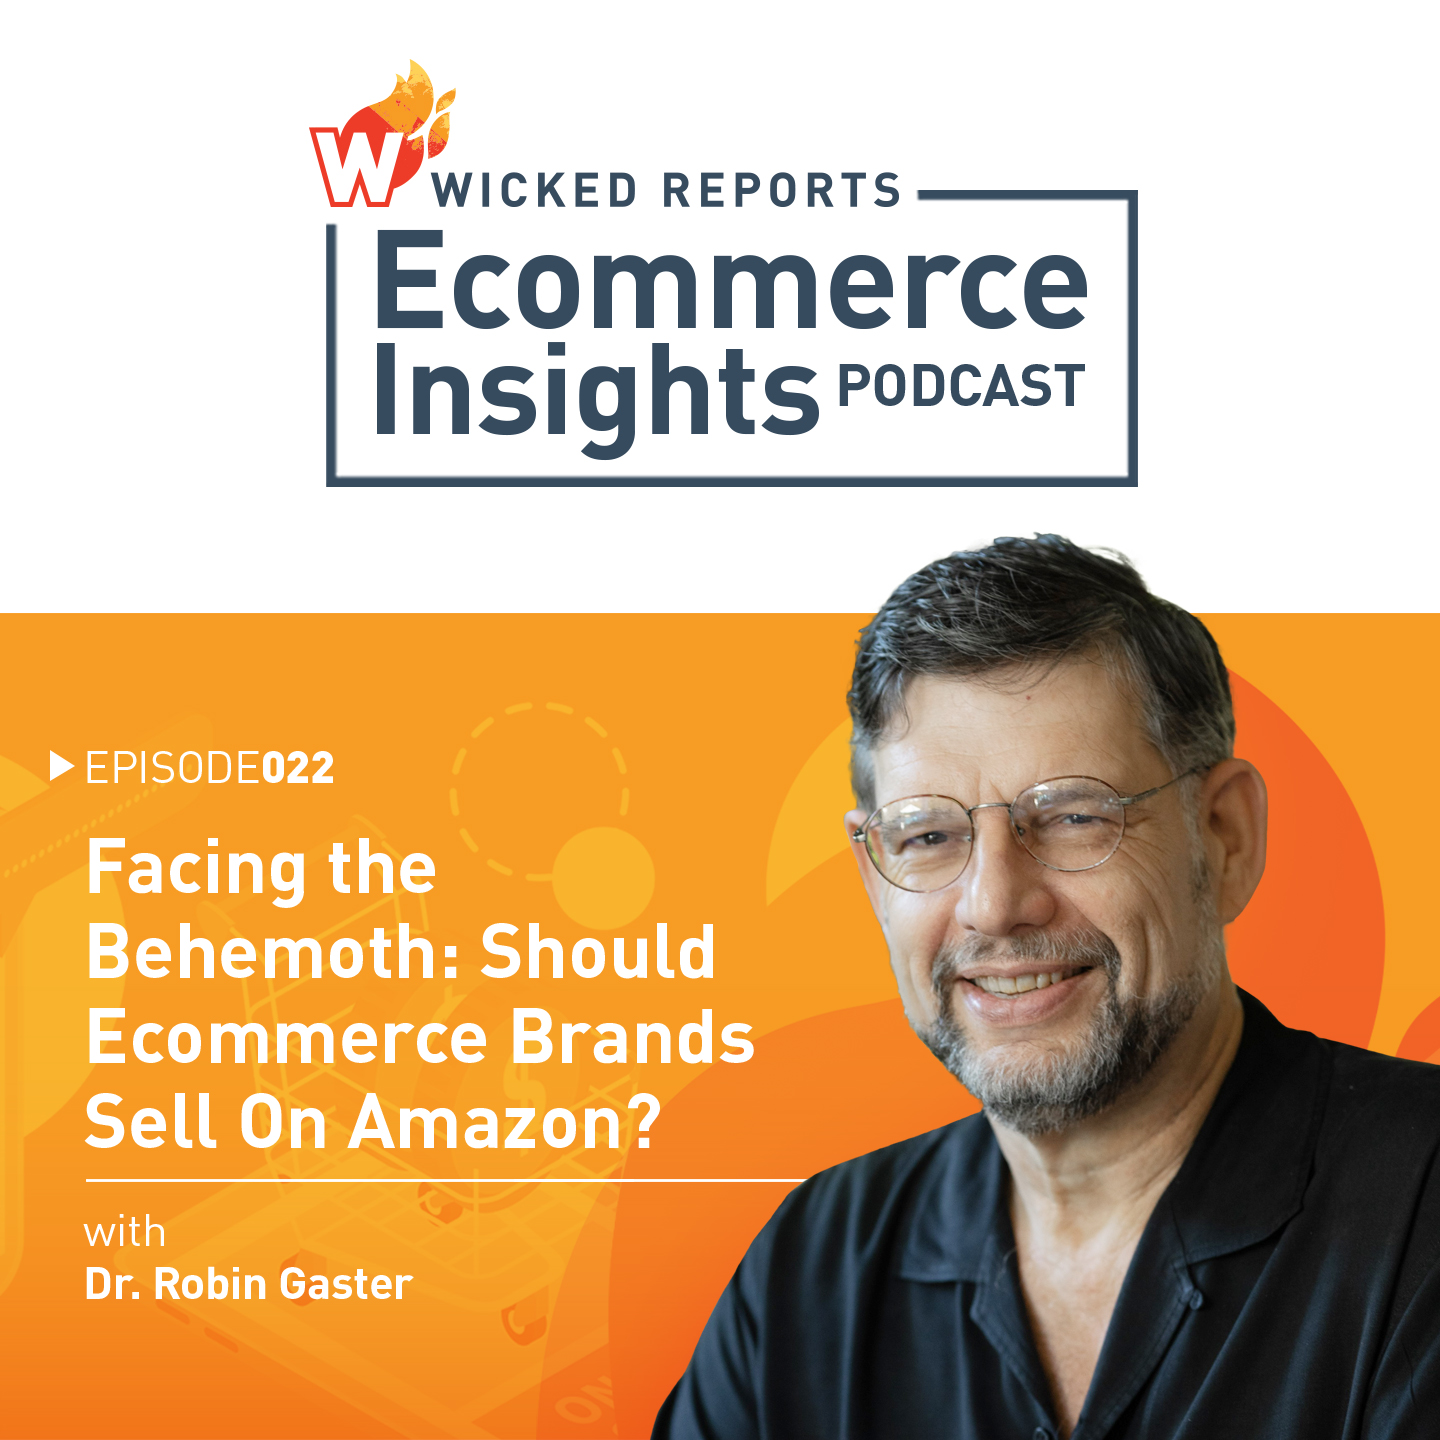 Facing the Behemoth: Should Ecommerce Brands Sell On Amazon?